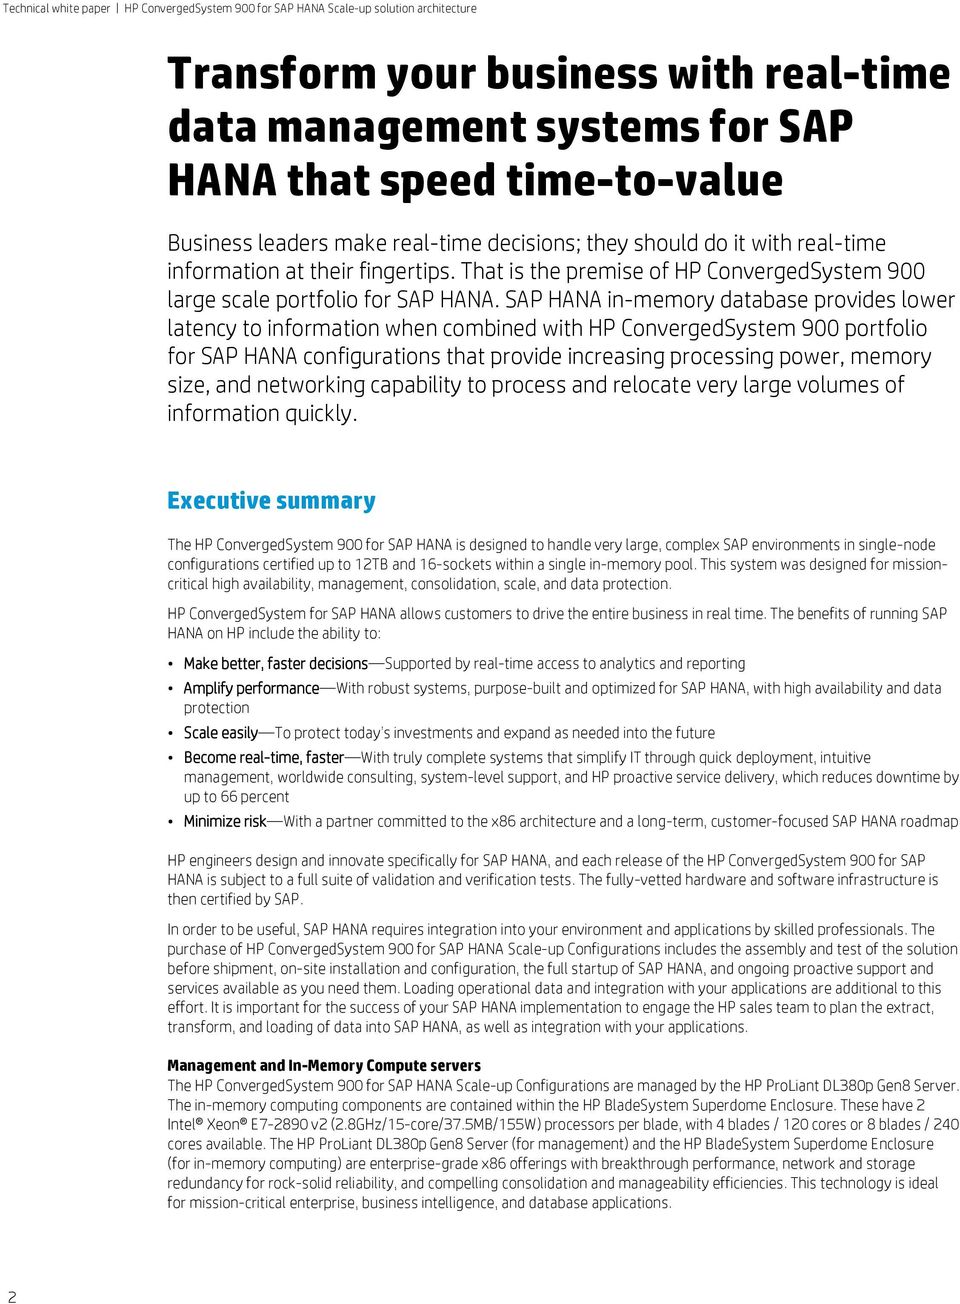 SAP HANA in-memory database provides lower latency to information when combined with HP ConvergedSystem 900 portfolio for SAP HANA configurations that provide increasing processing power, memory